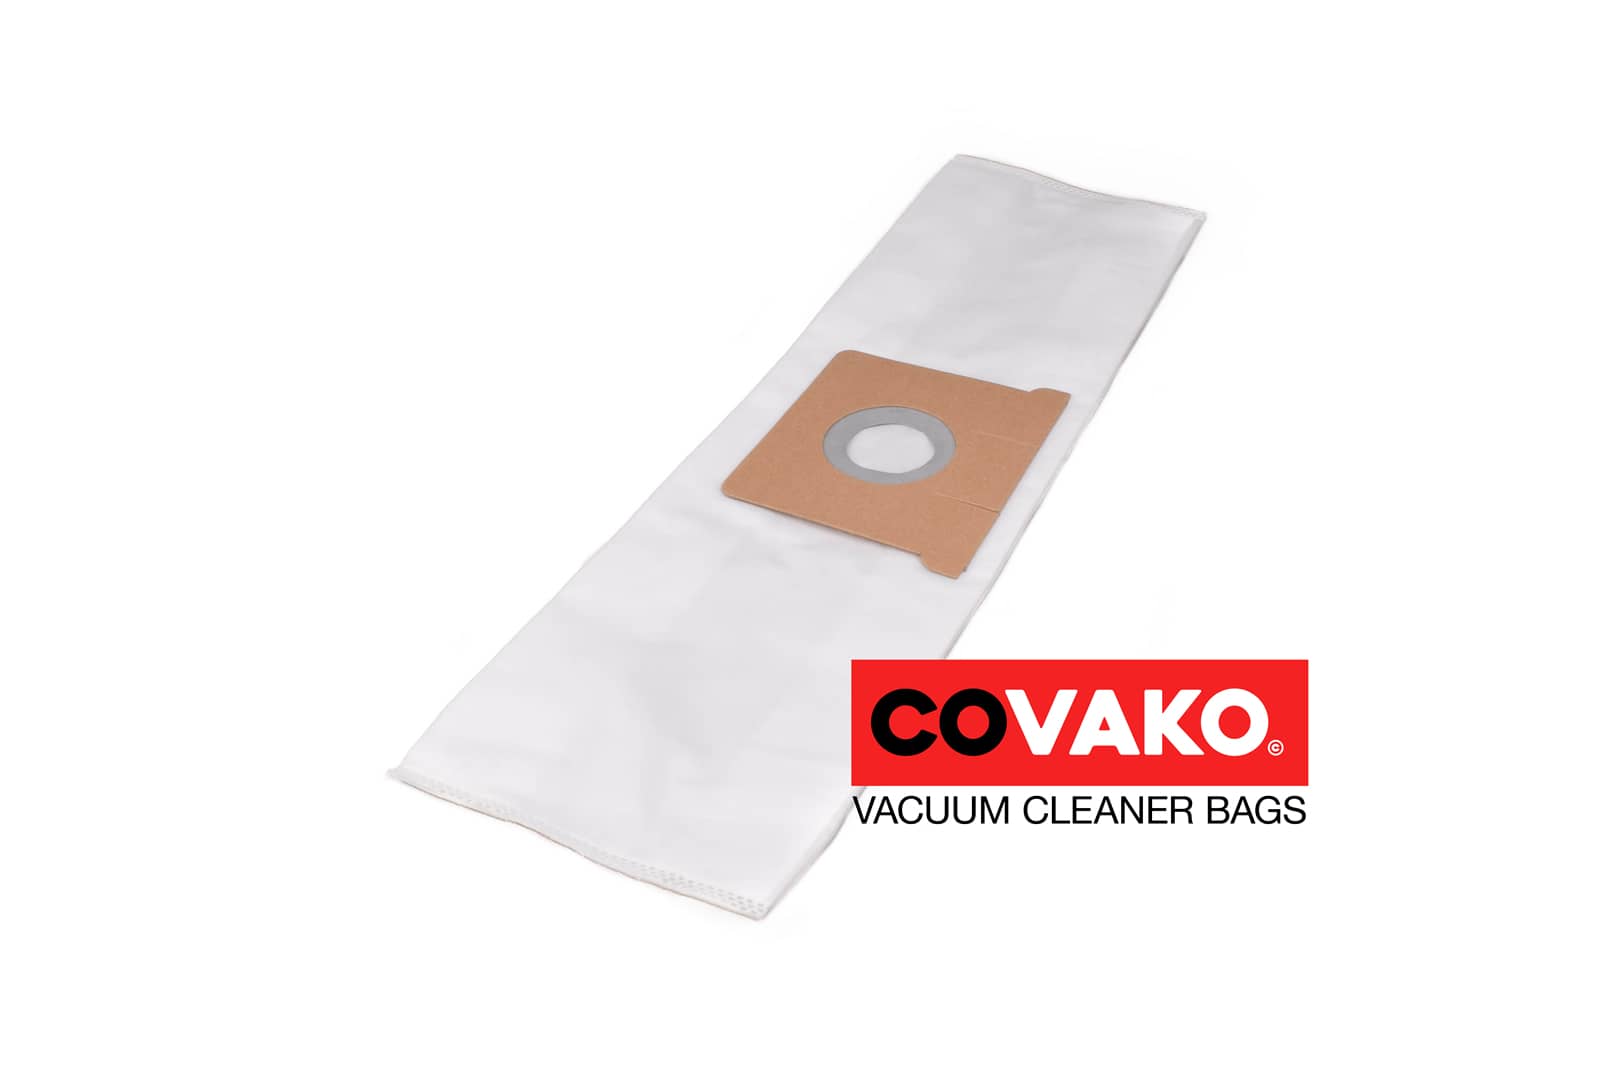 Gansow YP 1300/9 / Synthesis - Gansow vacuum cleaner bags